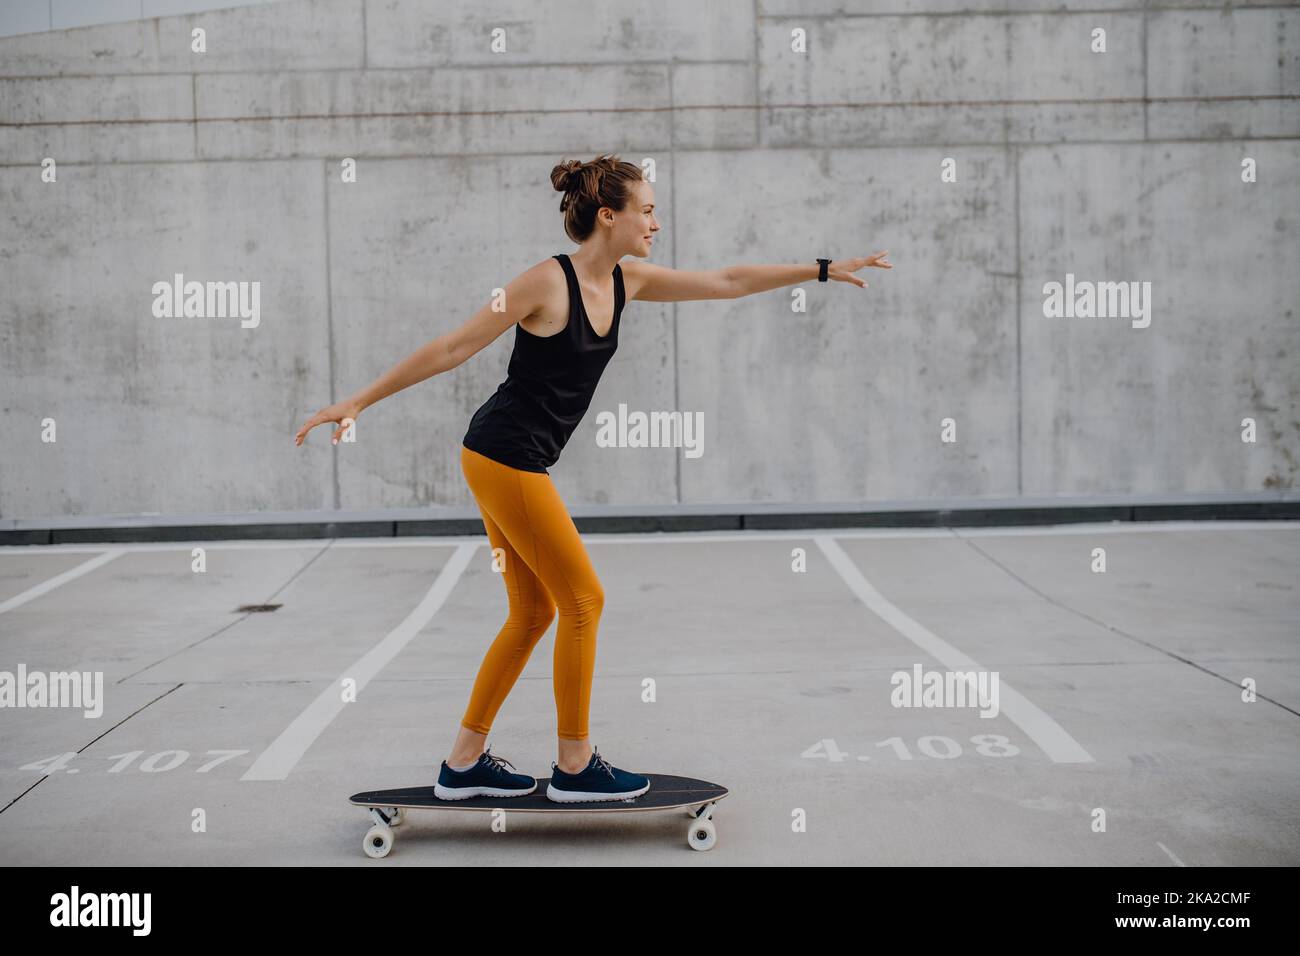 Young woman ridding skateboard at city. Youth culture and commuting concept. Stock Photo